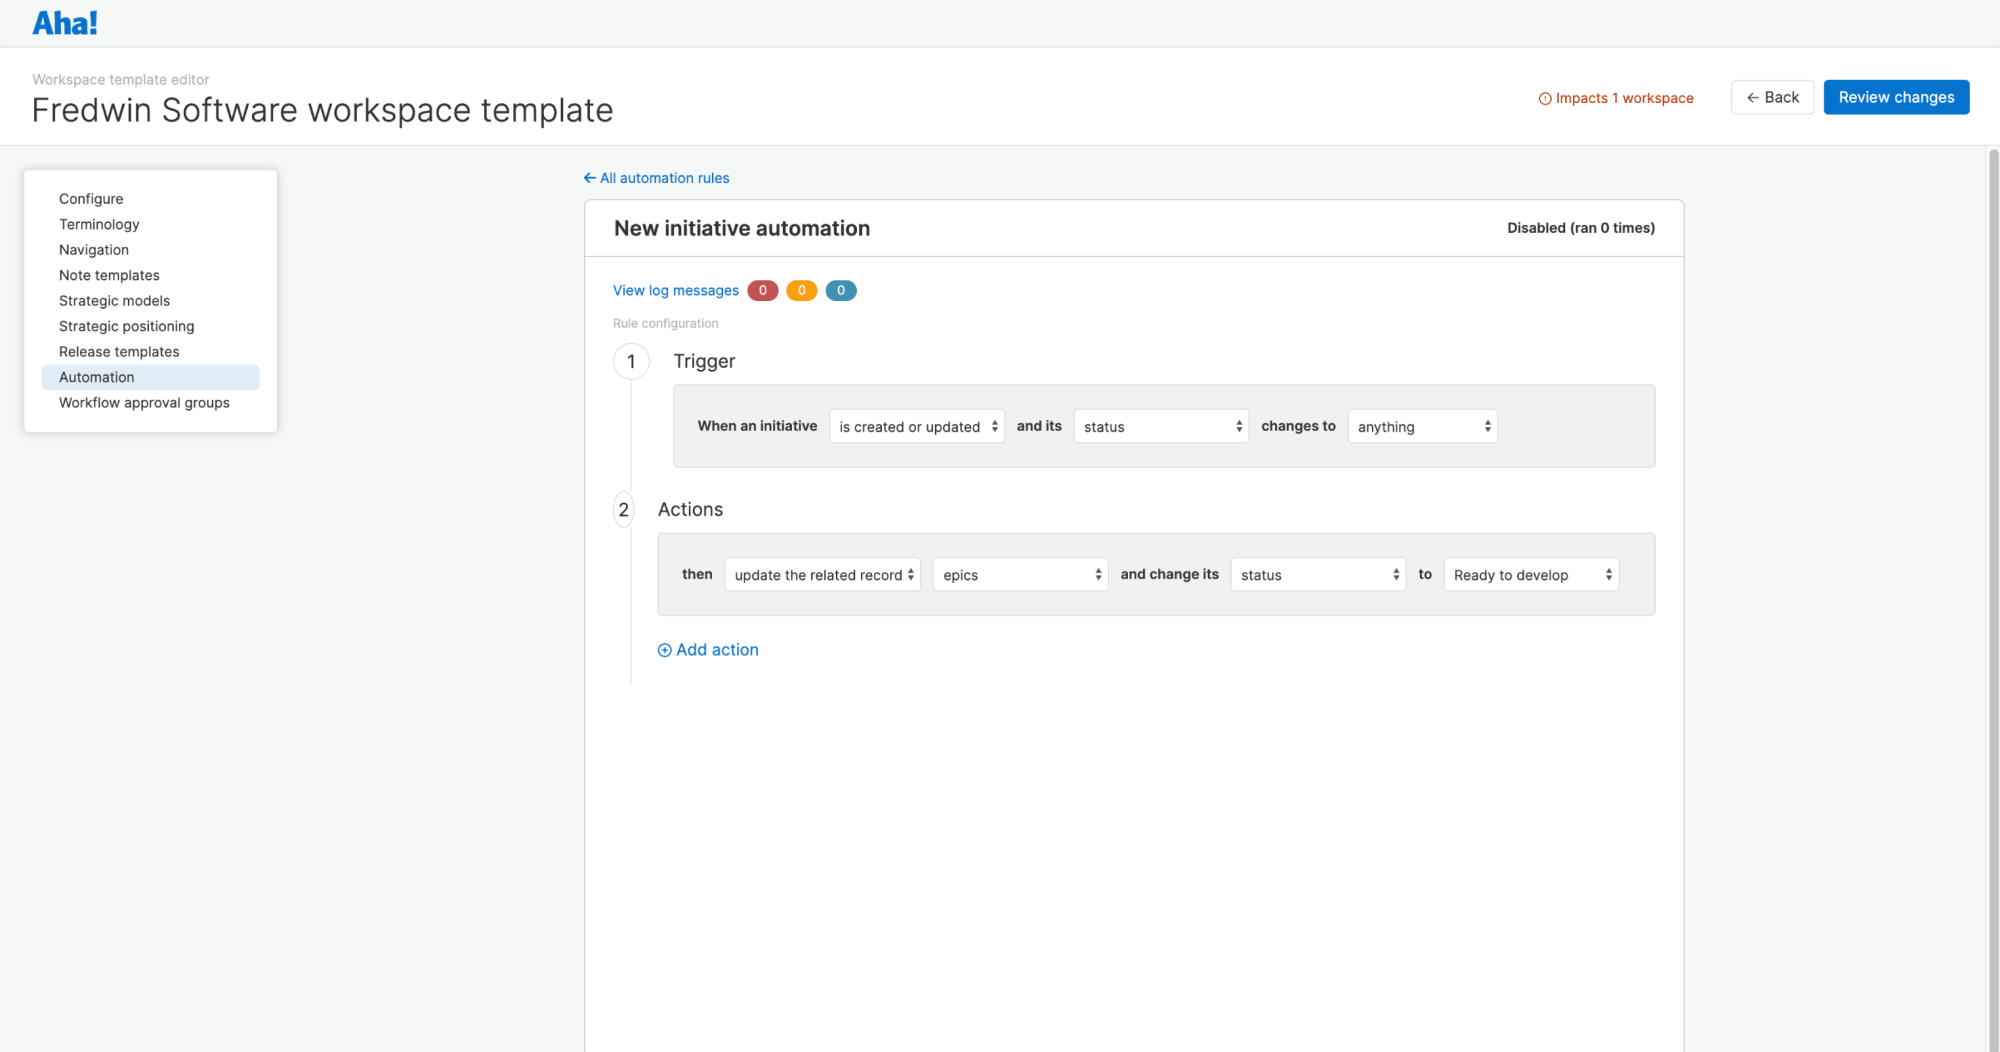 Review changes to your custom workspace templates before implementing them so that you can move forward with confidence.